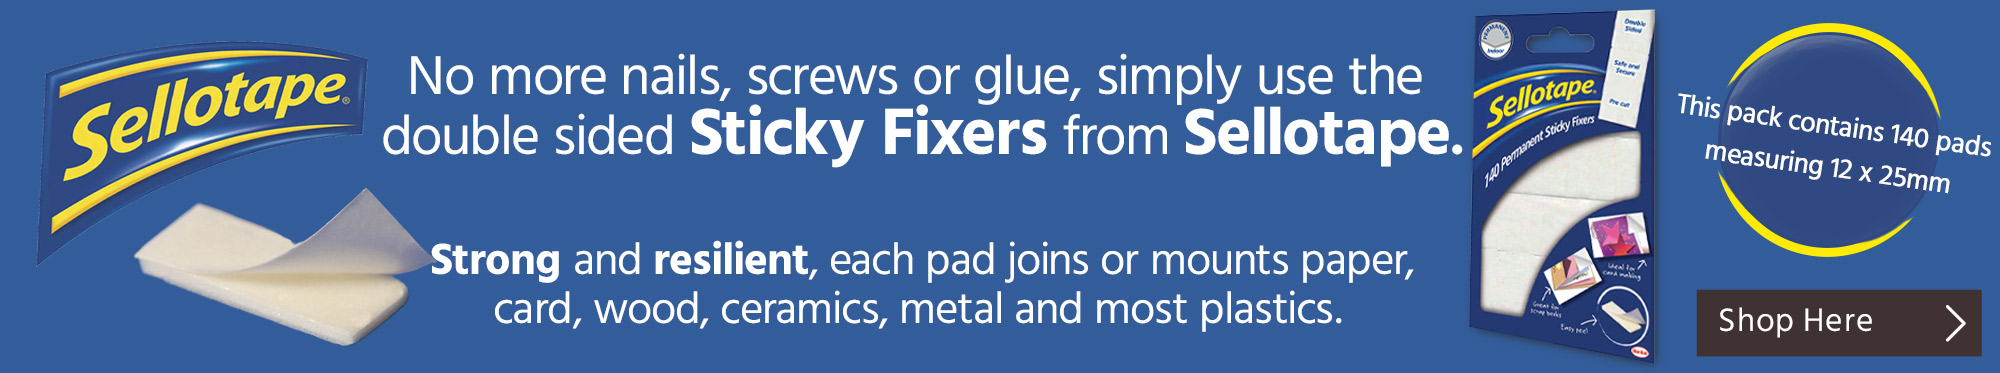 No More Nails, Screws or Glue with Sticky Fixers from Sellotape